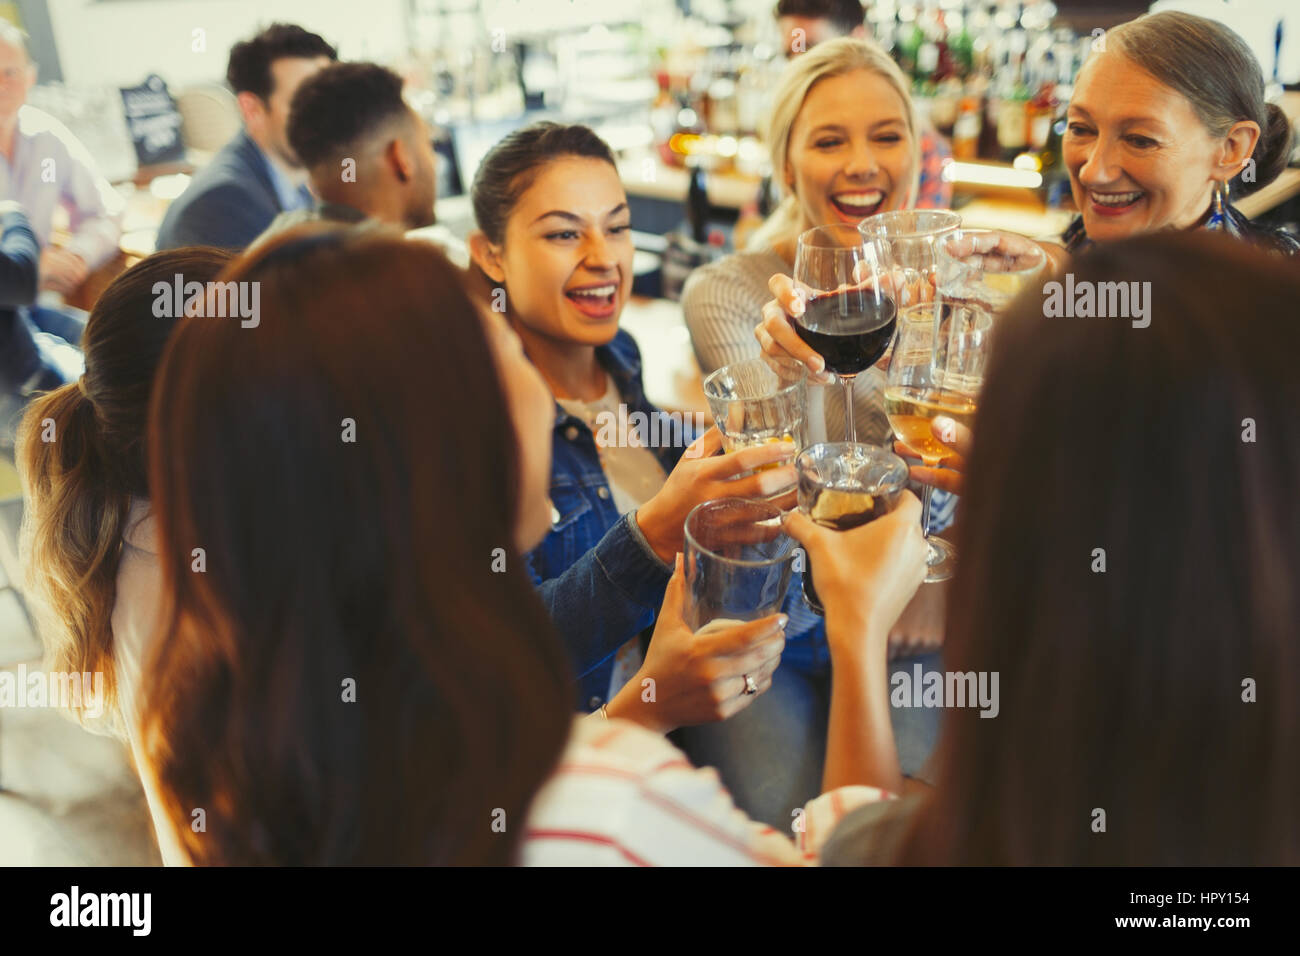 Enthusiastic women friends celebrating, toasting beer and wine glasses in bar Stock Photo